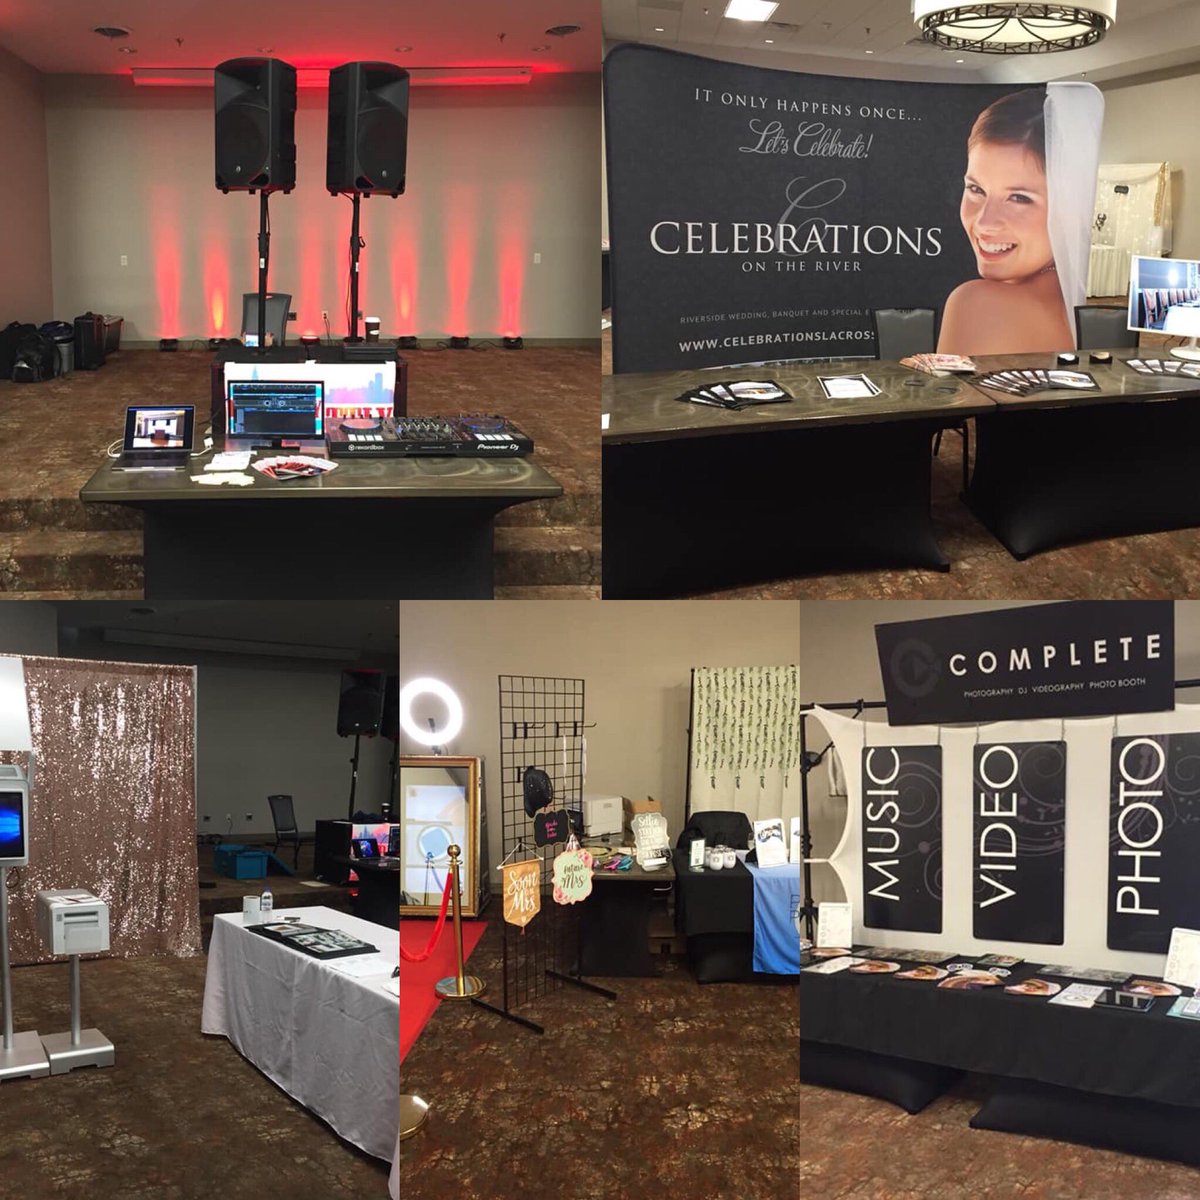 The #CouleeDreamWeddingExpo has started at @StayStoneyCreek Come on over for lots of awesome #weddingvendors & food samples! Stay for the Grand Prize @VacationsA2Z at 2:15pm! #CouleeDreamWedding #CDWE19